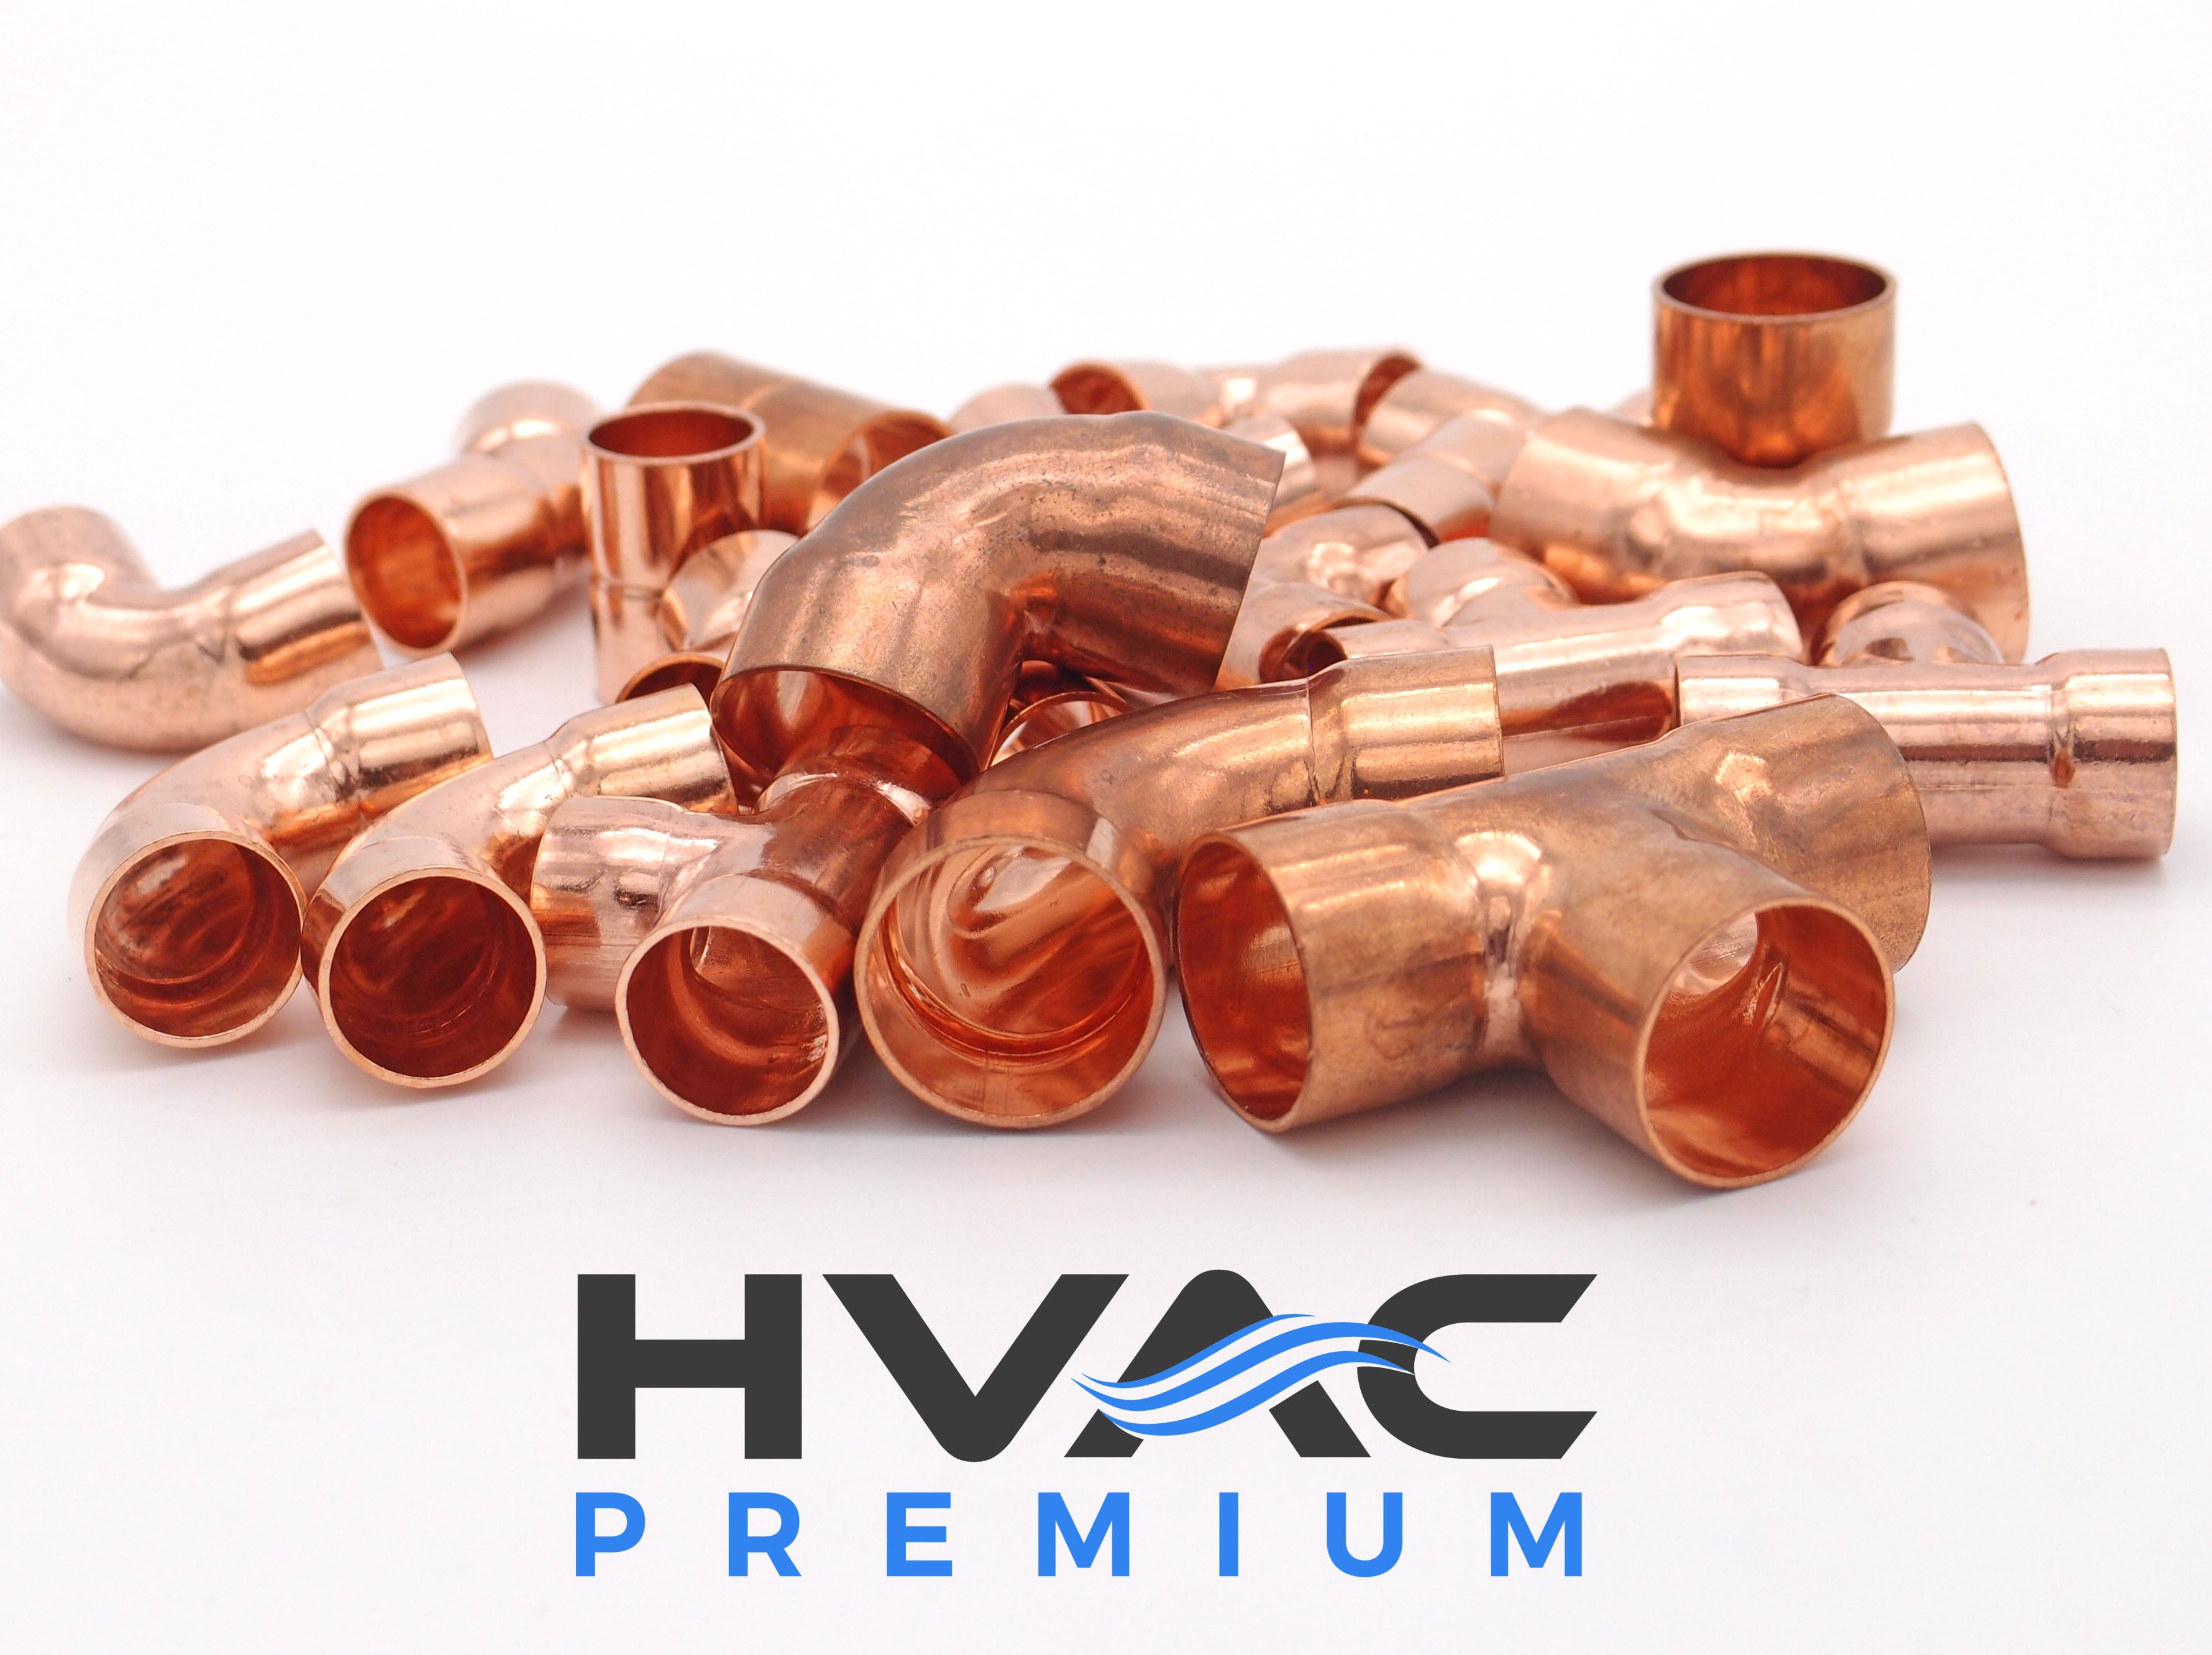 Copper Fitting 1 Inch (HVAC Outer Dimension) 7/8 Inch (Plumbing Inner Dimension) - Copper 90 Degree Elbow Fitting Connector - 99.9% Pure Copper - 10 Pack